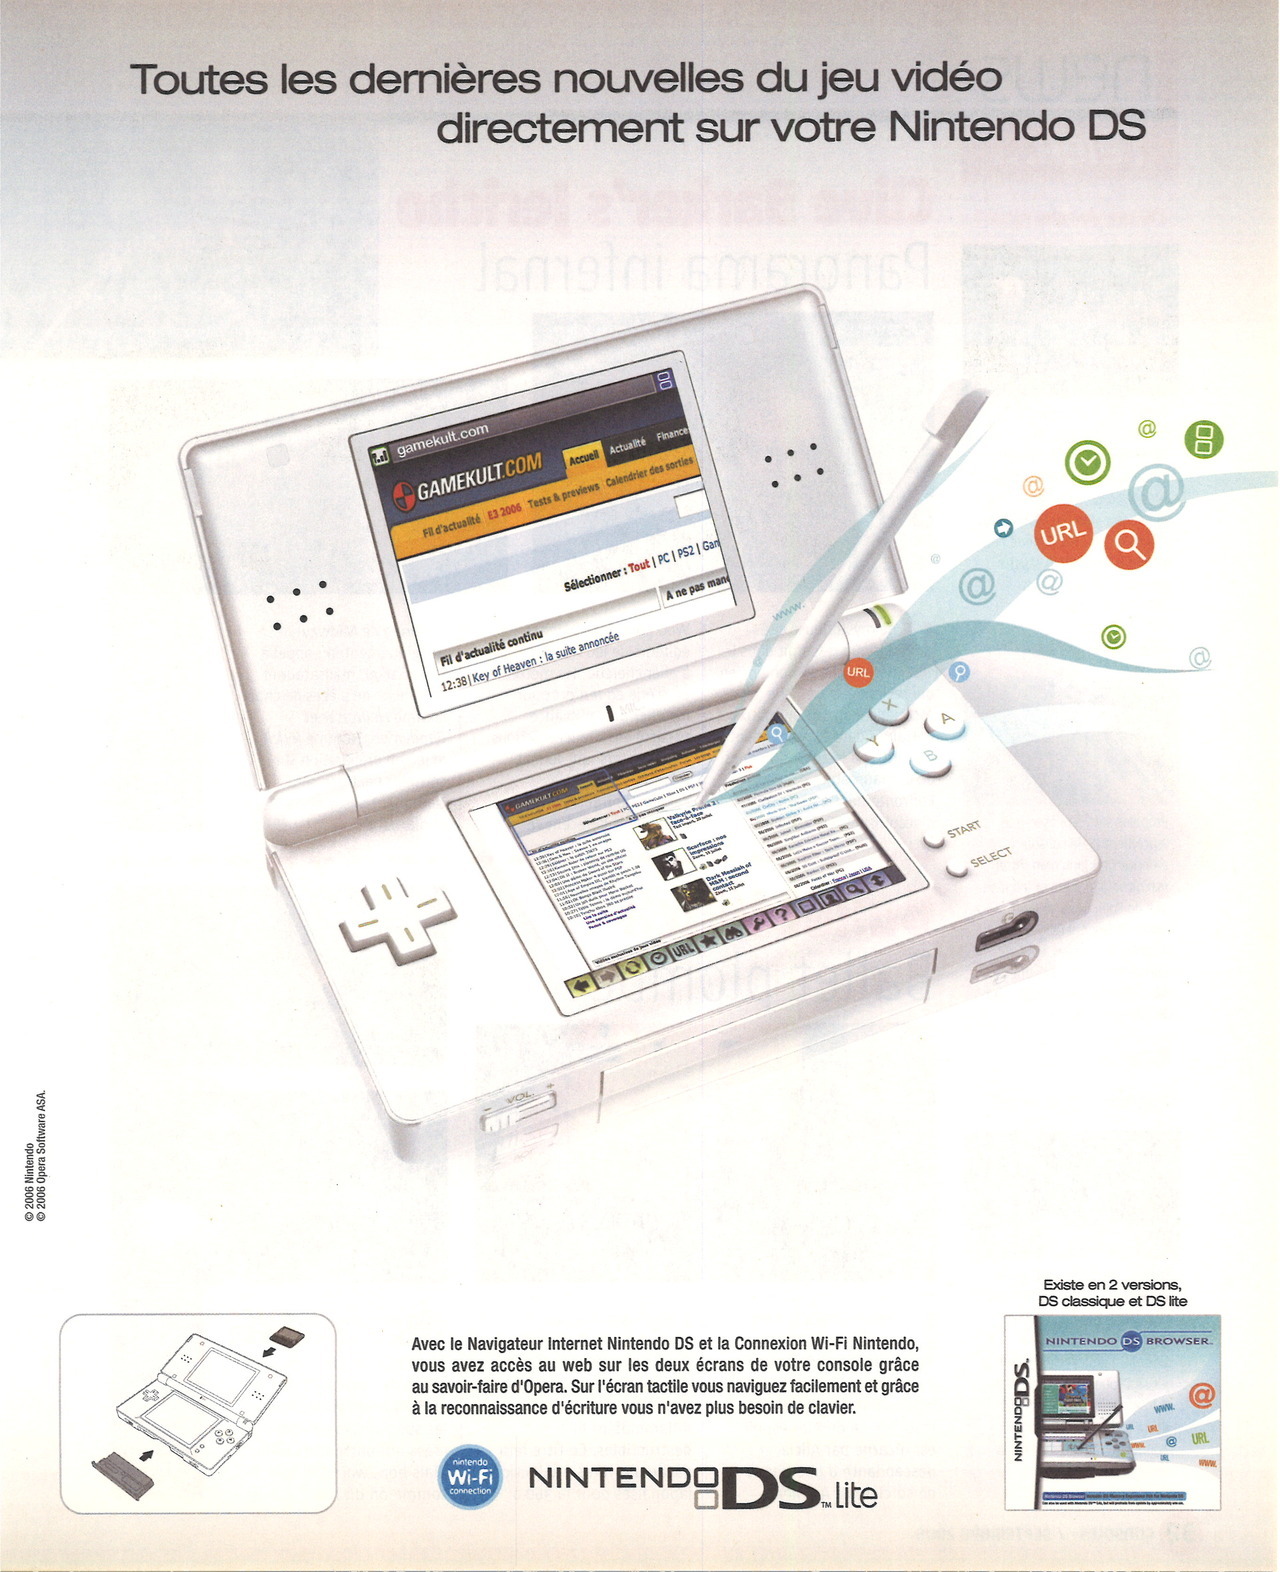 ‘Nintendo DS Browser‘[DS] [FRANCE] [MAGAZINE] [2006]
“The Nintendo DS Browser is a port of the Opera 8.5 web browser for use on the Nintendo DS, developed by Opera Software and Nintendo. Two versions were sold, one for the original Nintendo DS and...